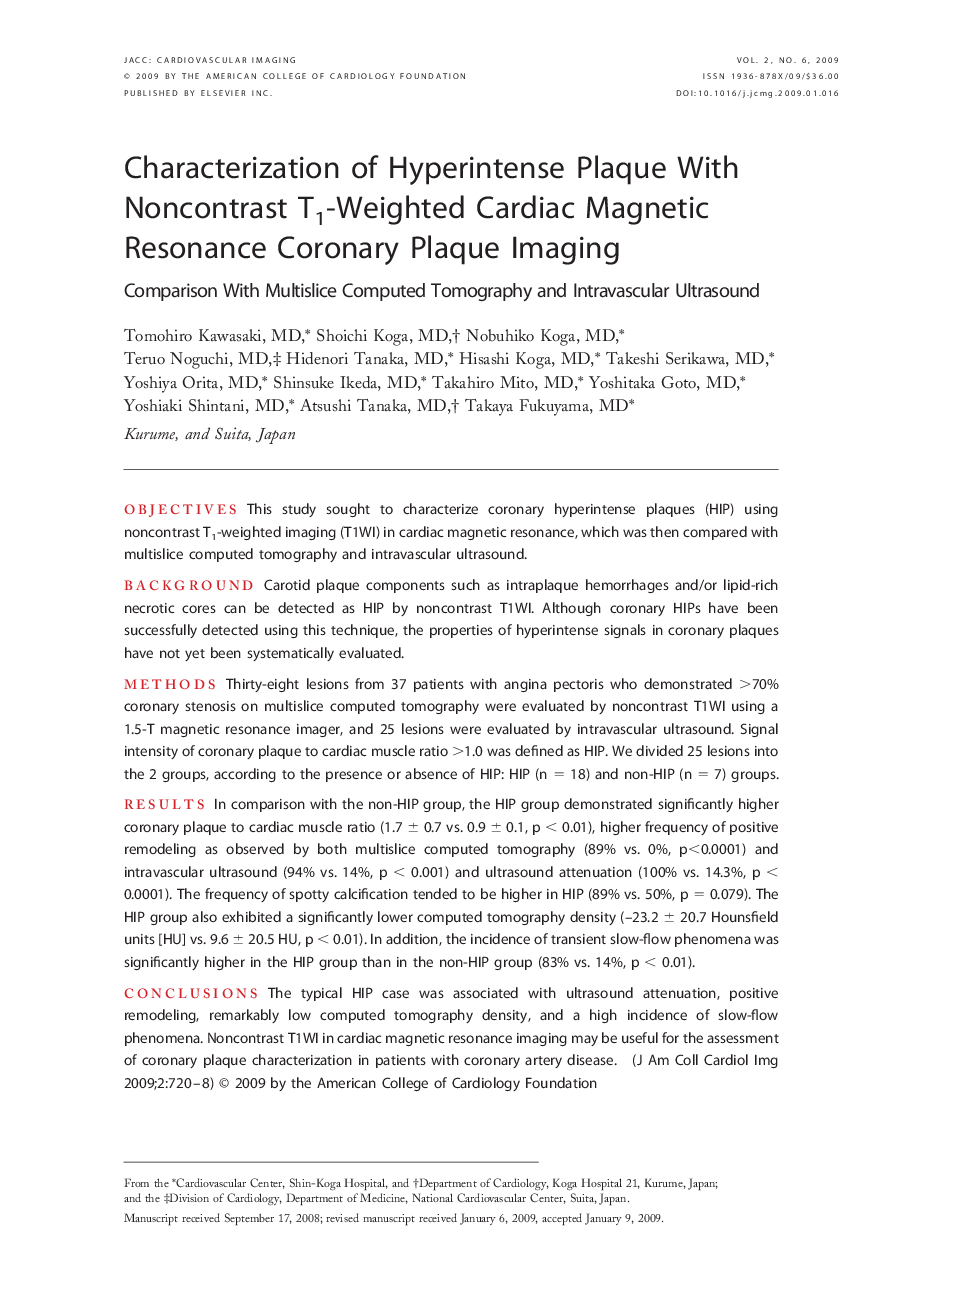 Characterization of Hyperintense Plaque With Noncontrast T1-Weighted Cardiac Magnetic Resonance Coronary Plaque Imaging: Comparison With Multislice Computed Tomography and Intravascular Ultrasound